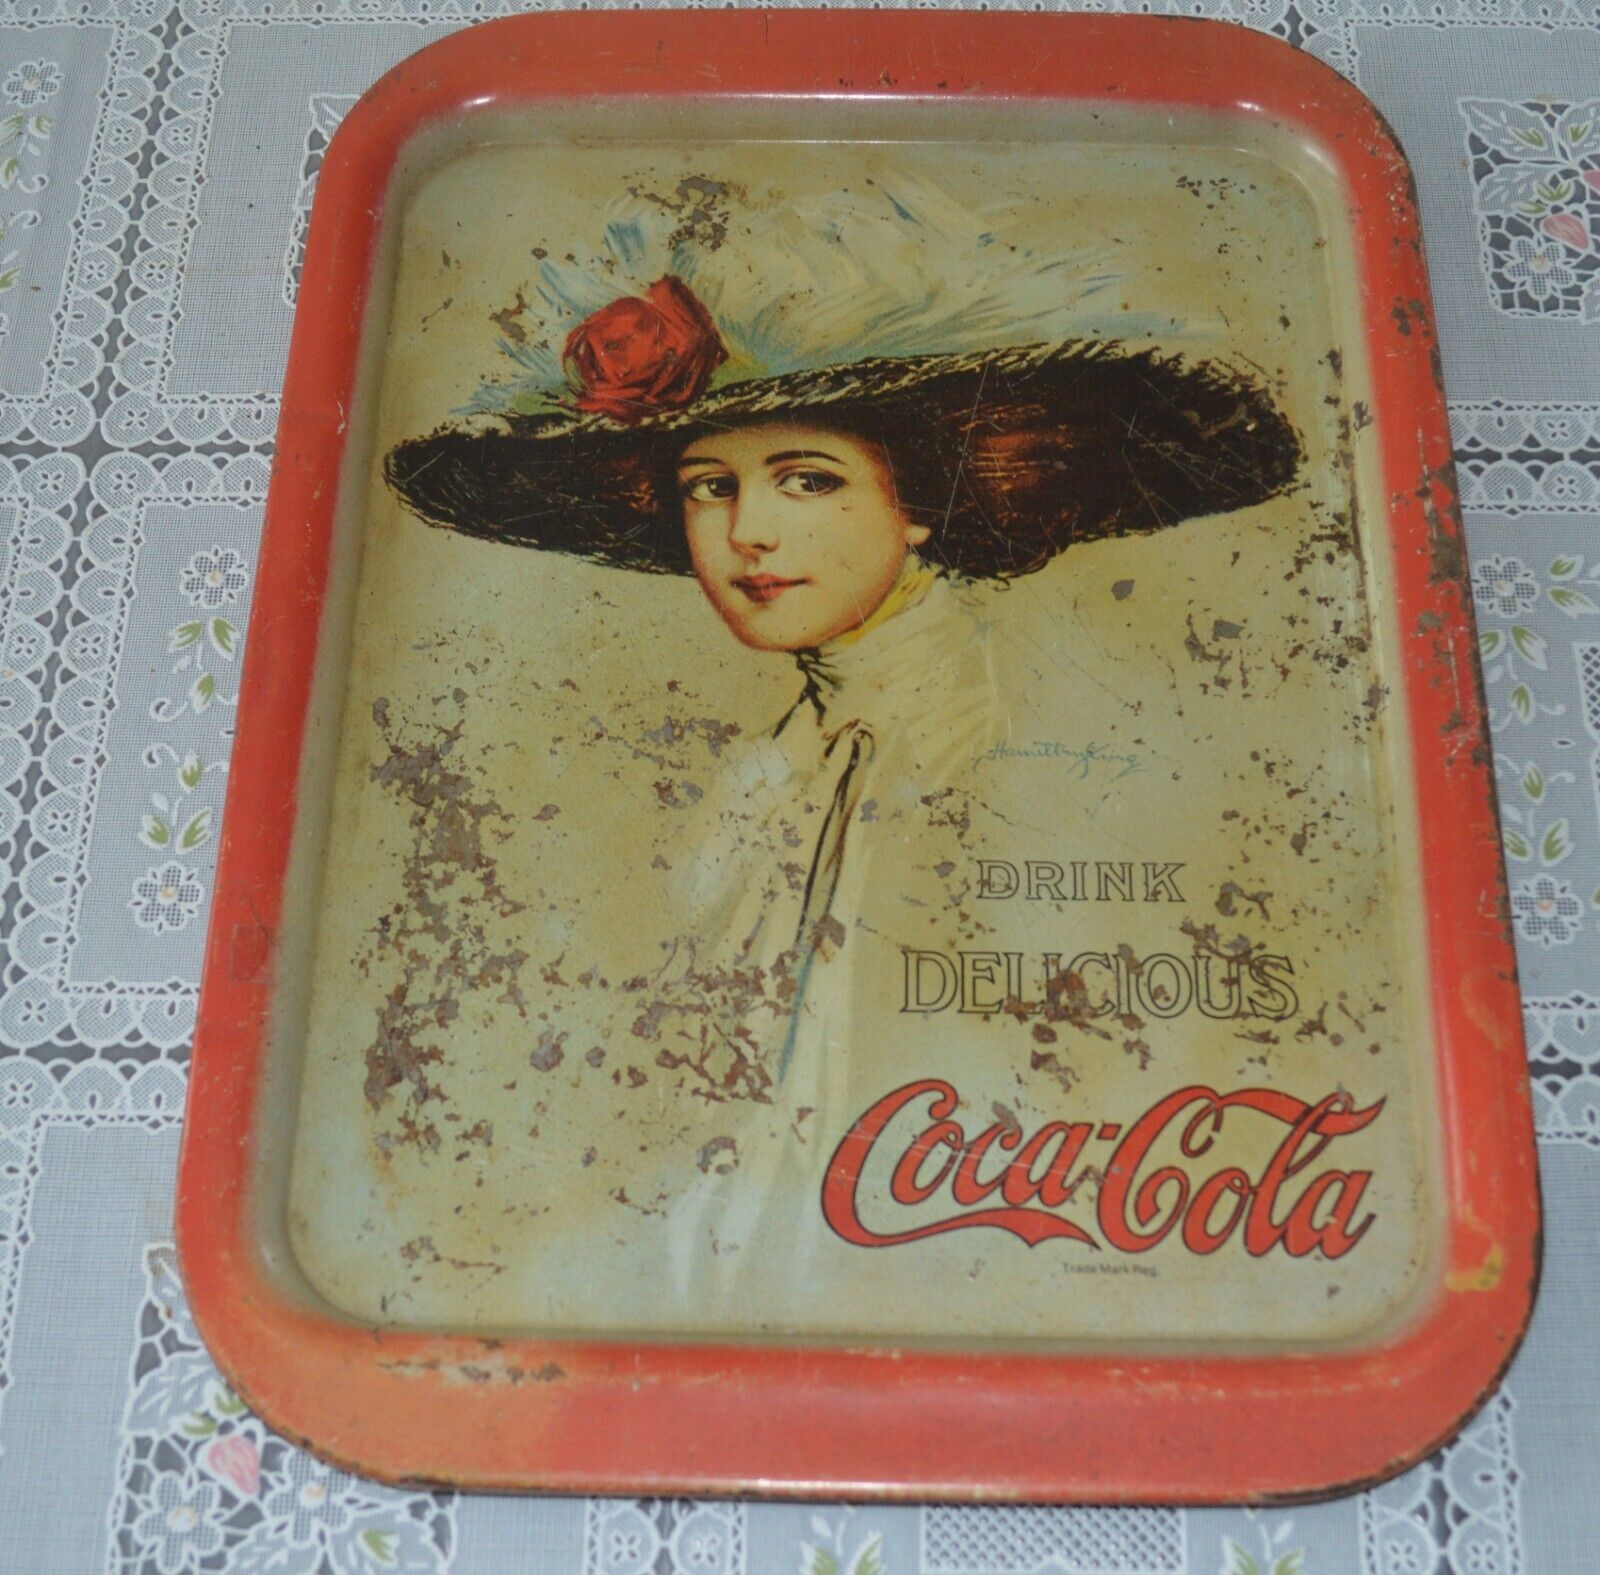 Primary image for Vintage Drink Delicious Coca Cola Tray. Woman w Faether Hat & Red Rose